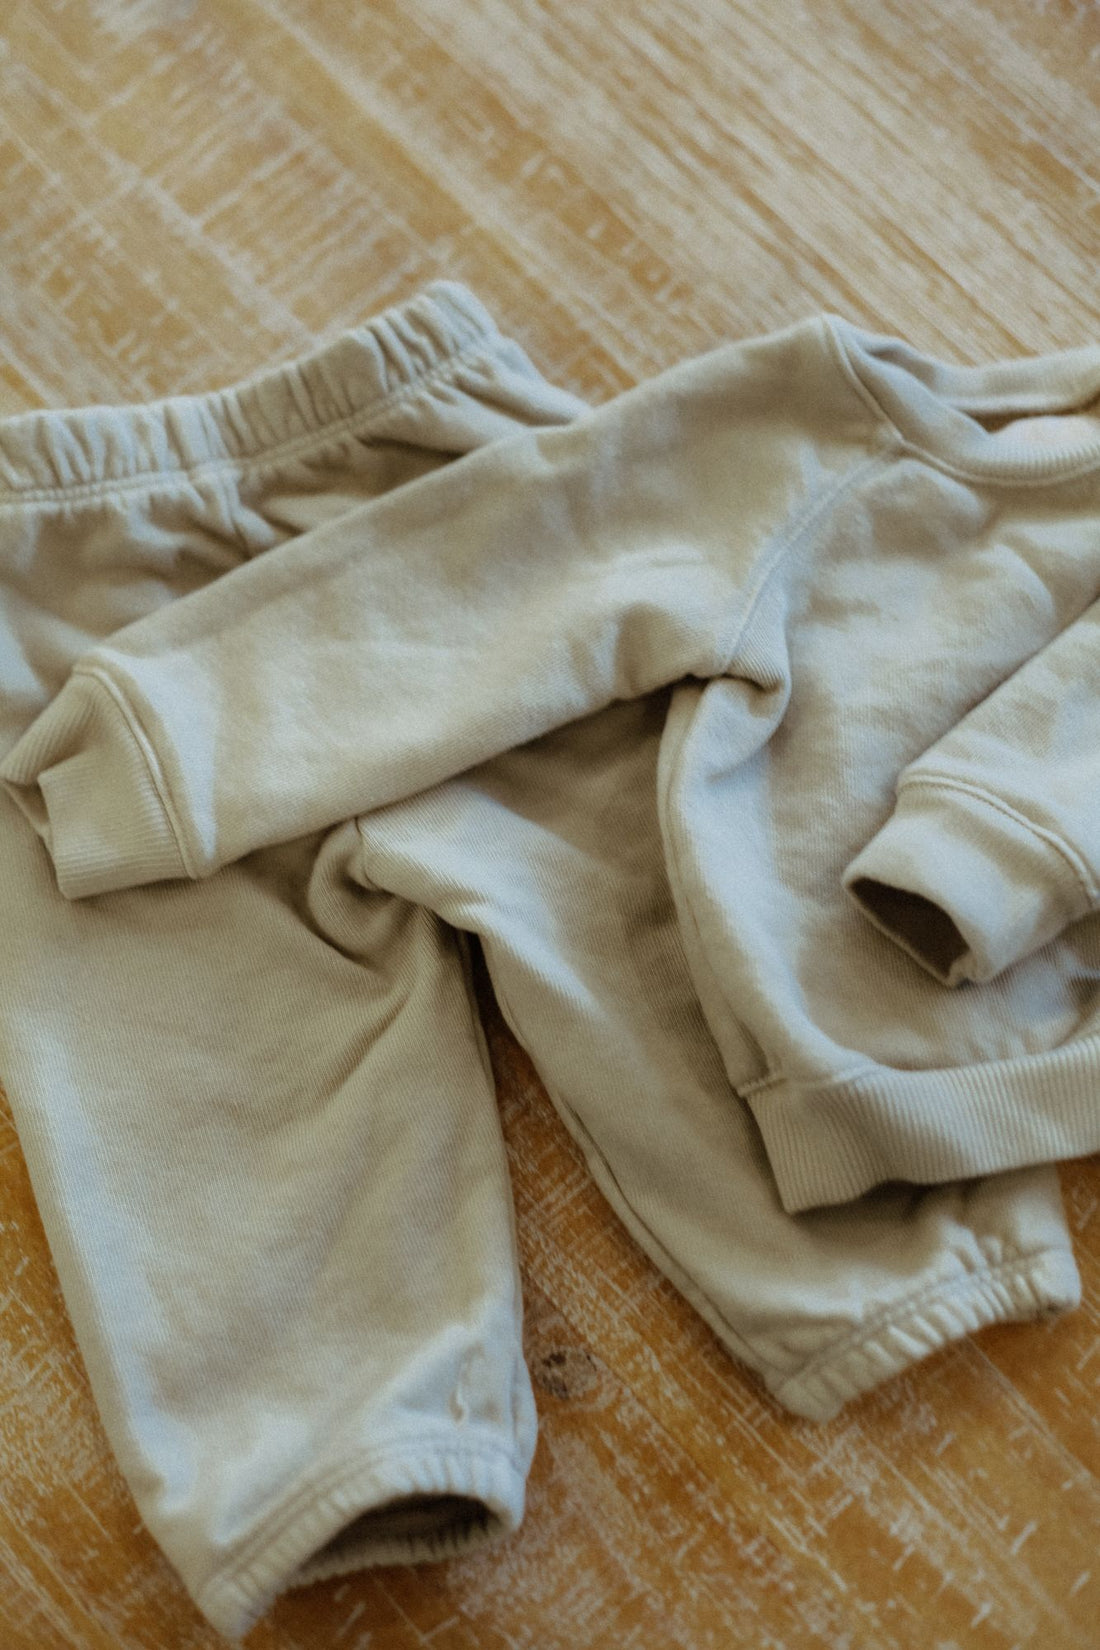 What To Do When Your Baby Grows Out of Their Clothes